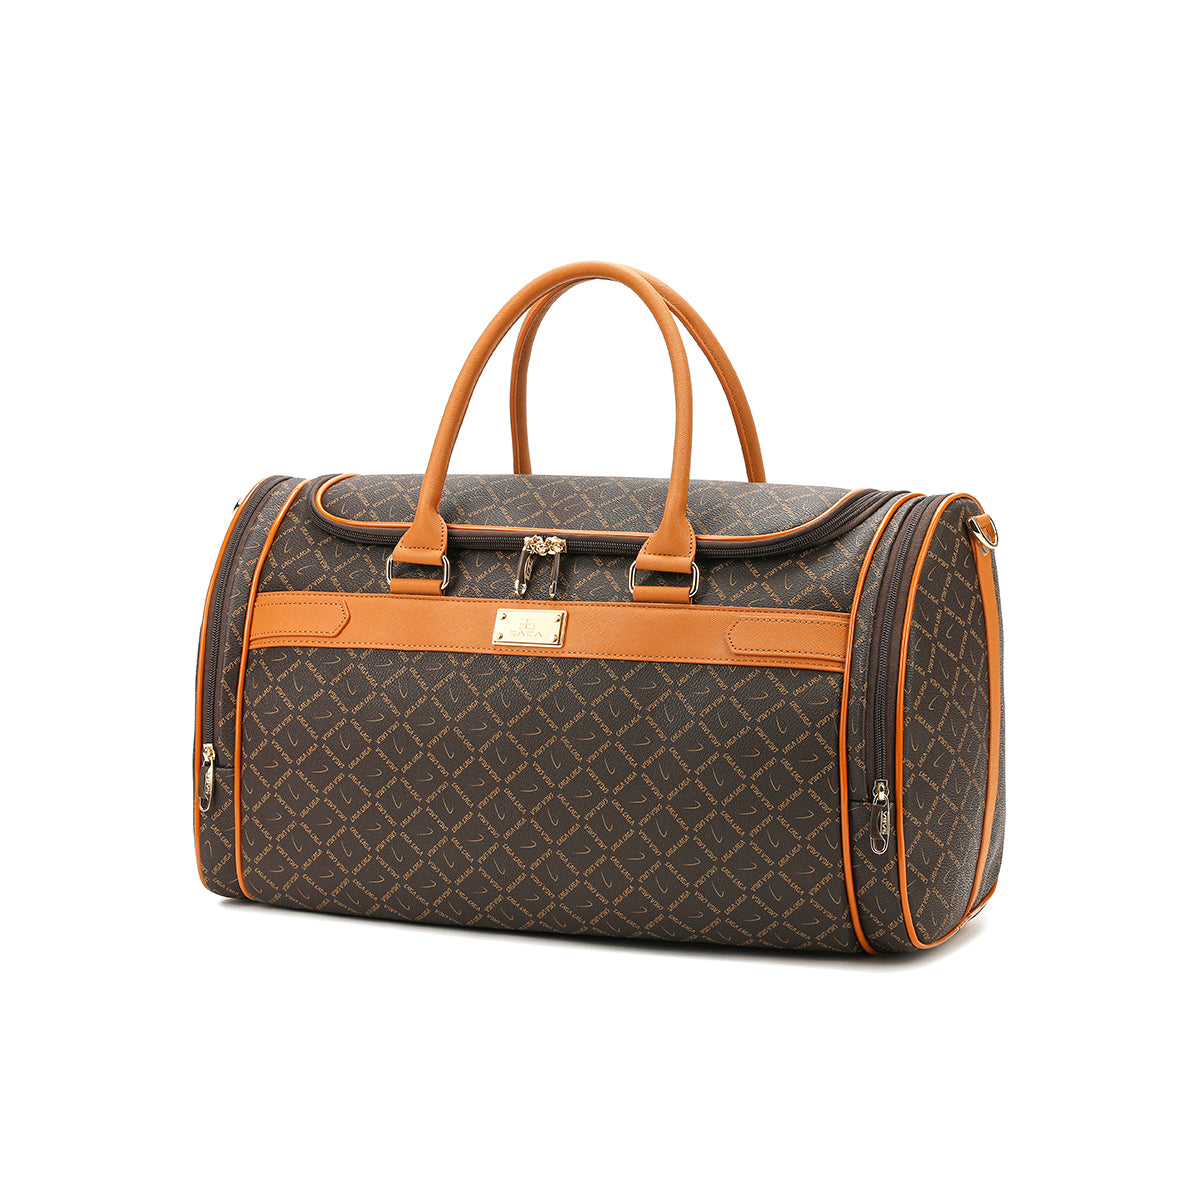 Sports travel bag 18 inches for the plane, brown color